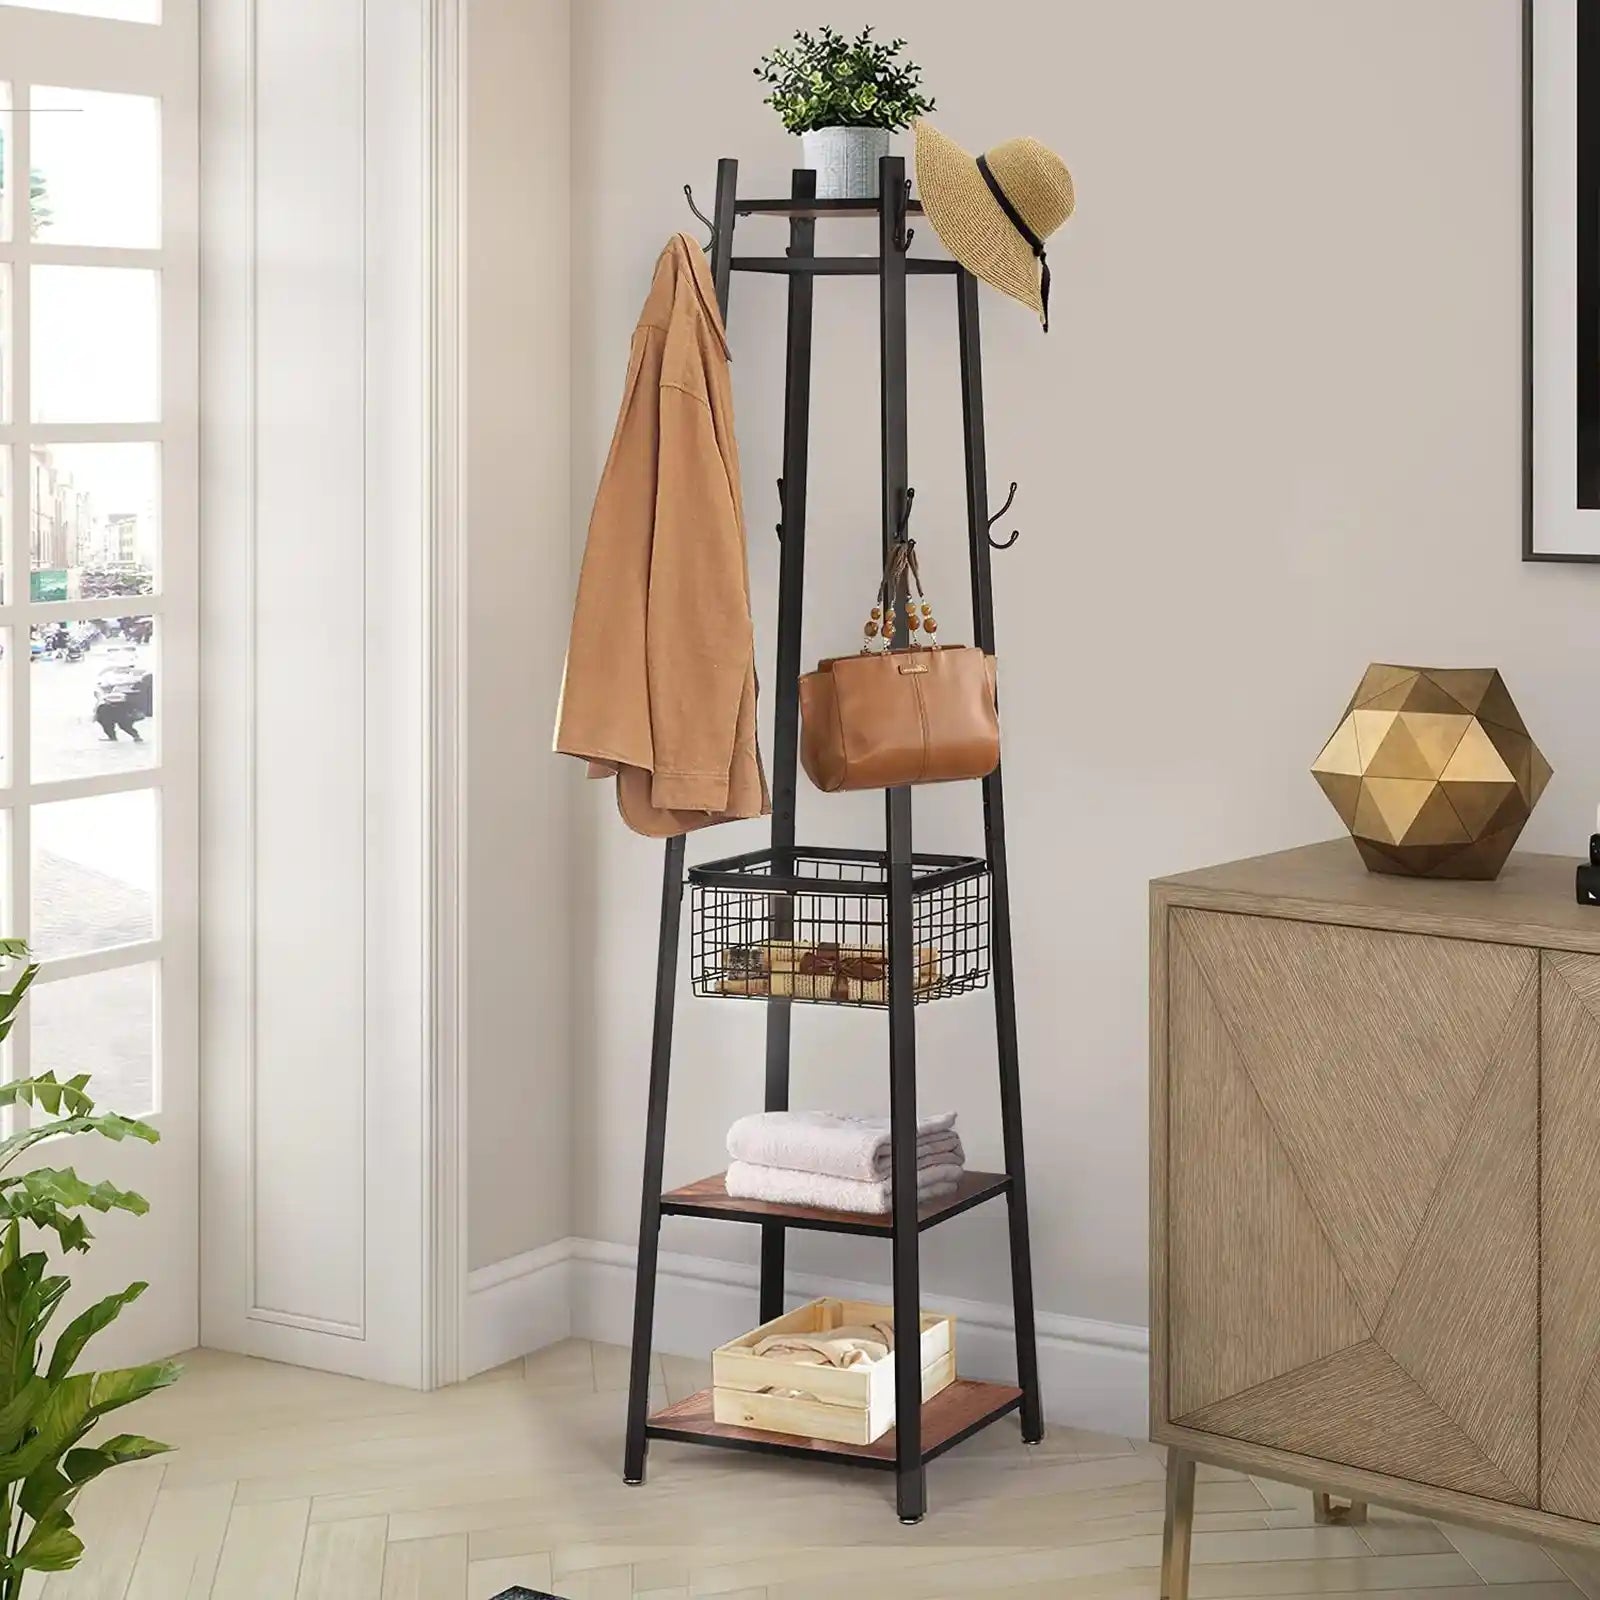 Industrial Coat Rack Stand, Hall Trees Freestanding, Entryway Clothes Stand with Metal Basket and 2 Shelves, Purse Hanger with 8 Dual Hooks/Stable Structure for Hats Bags and Scarves